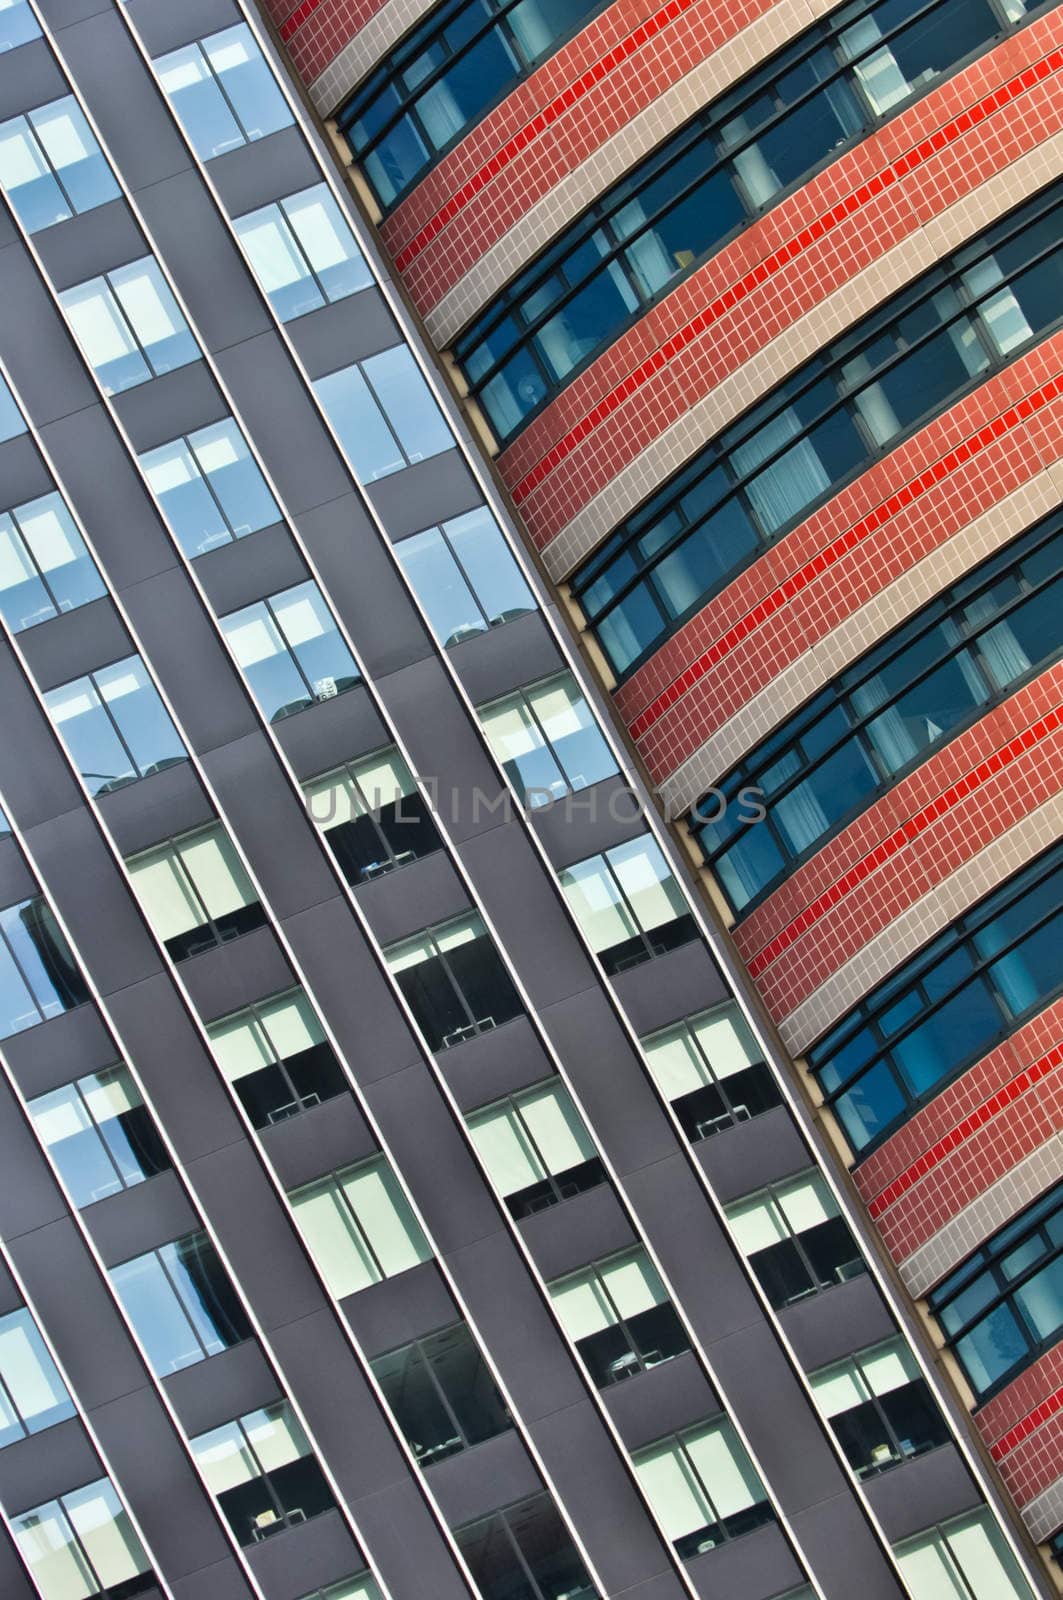 close-up on the wall with the windows of modern buildings